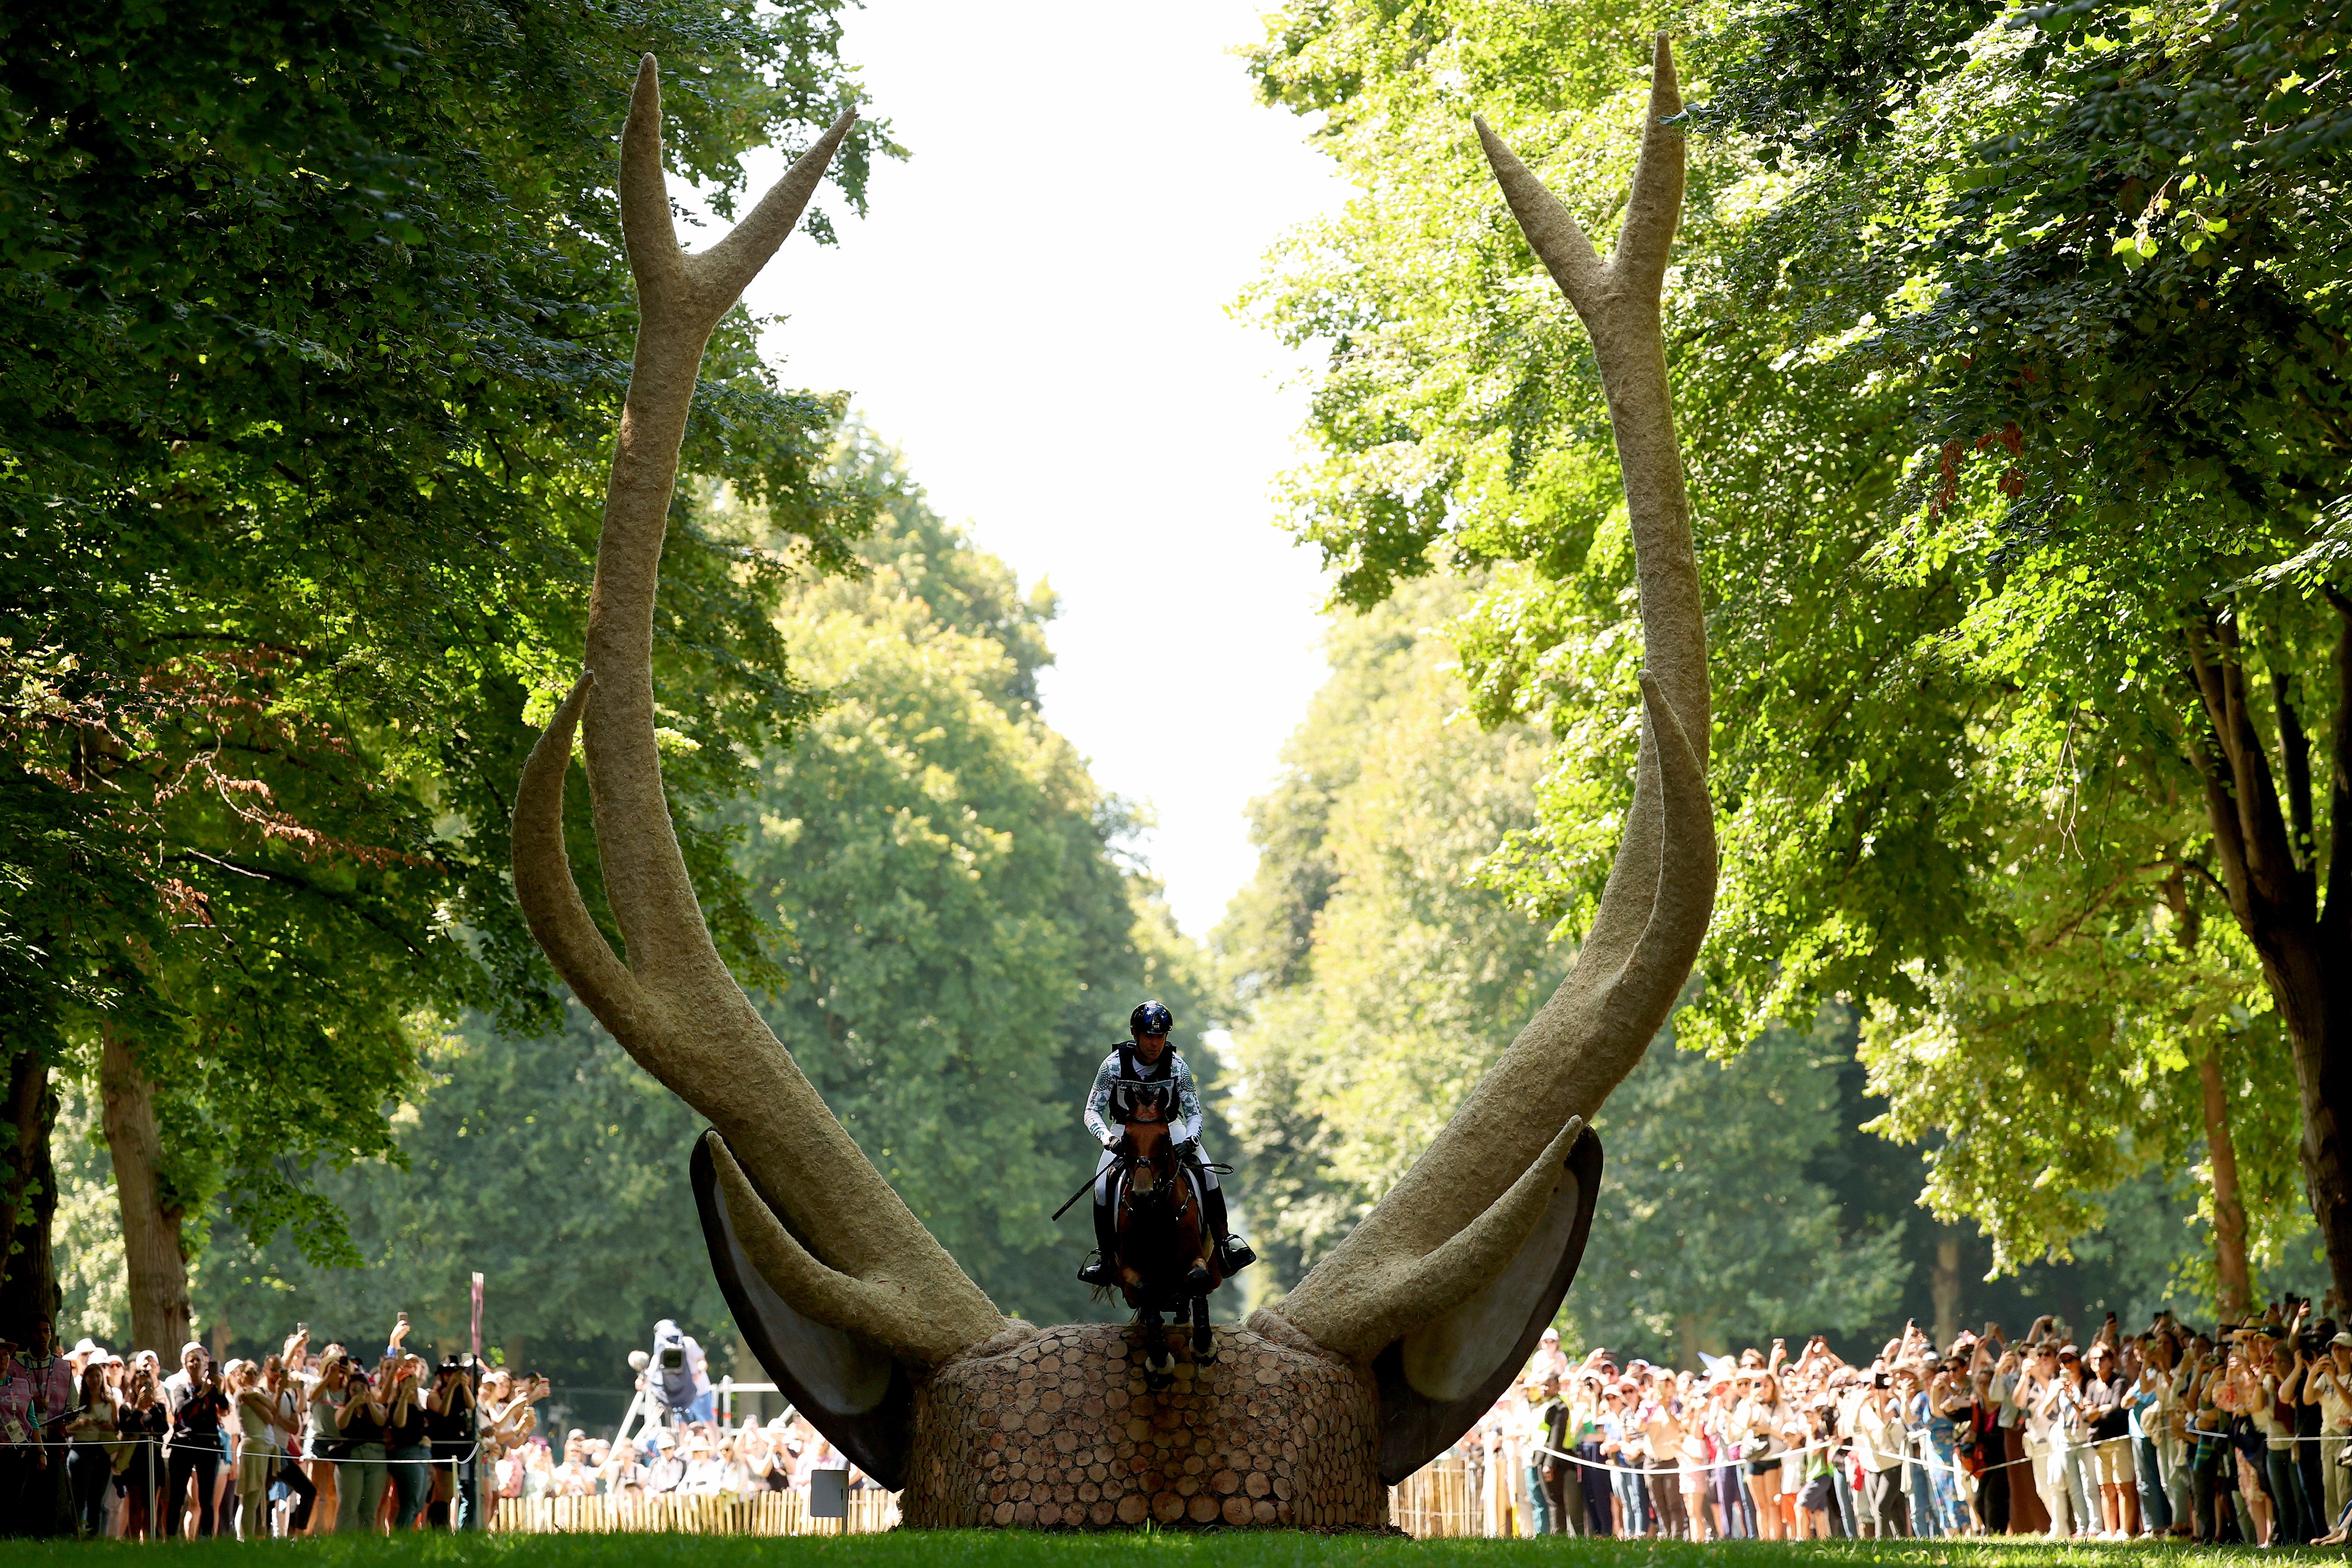 A horse and rider leap over a hurdle shaped like the head of a large stag with very tall antlers on each side.